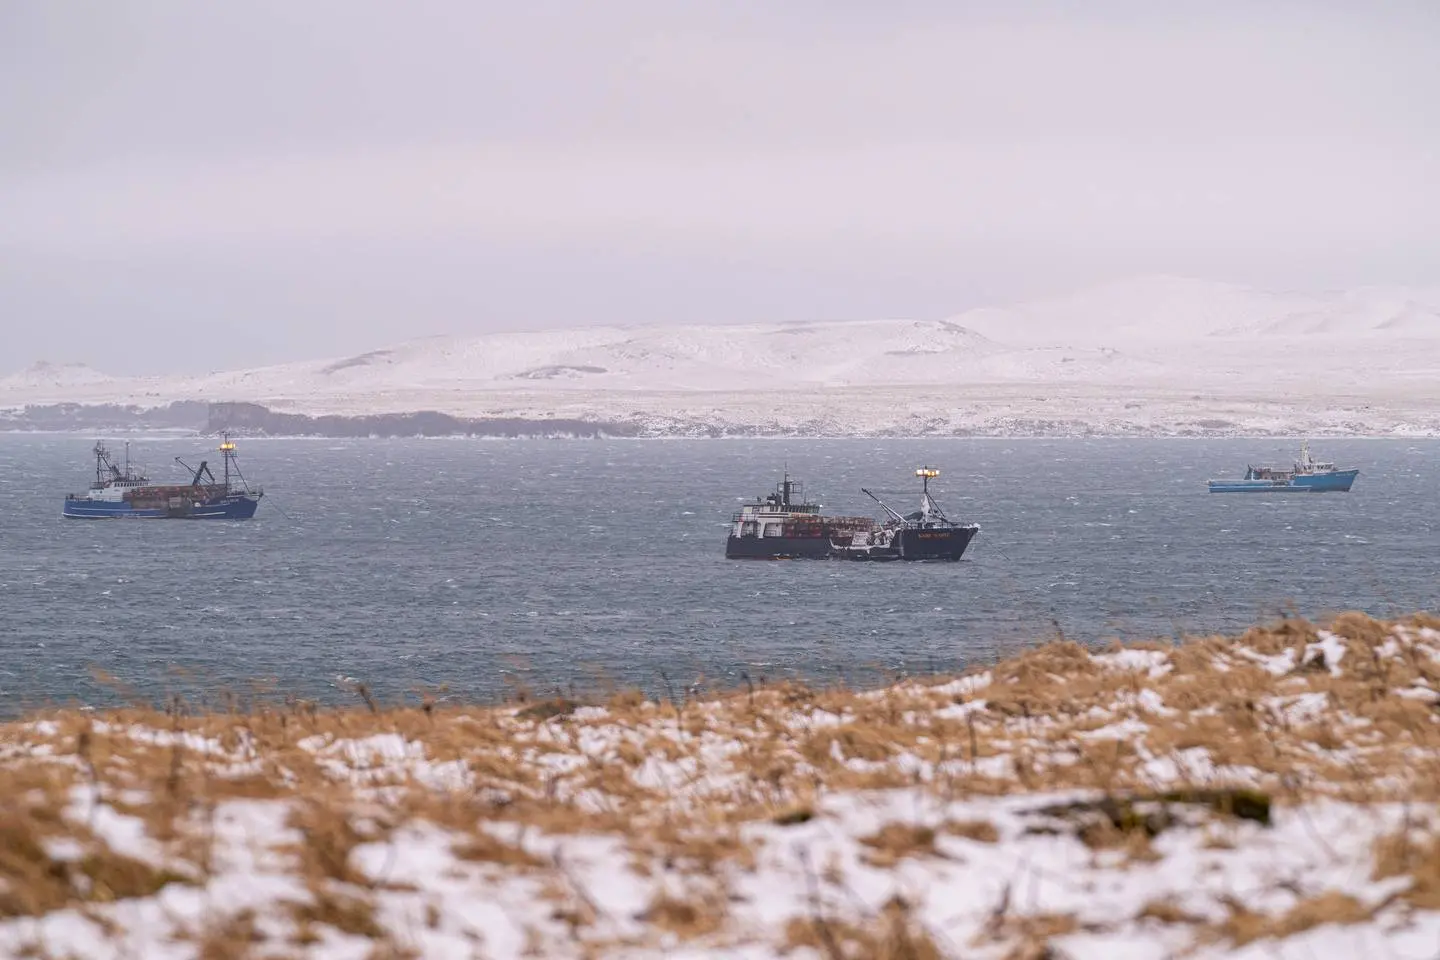 From left, the fishing boats Billikin, Kari Marie, and Silver Spray wait out a storm in the lee of St. Paul Island